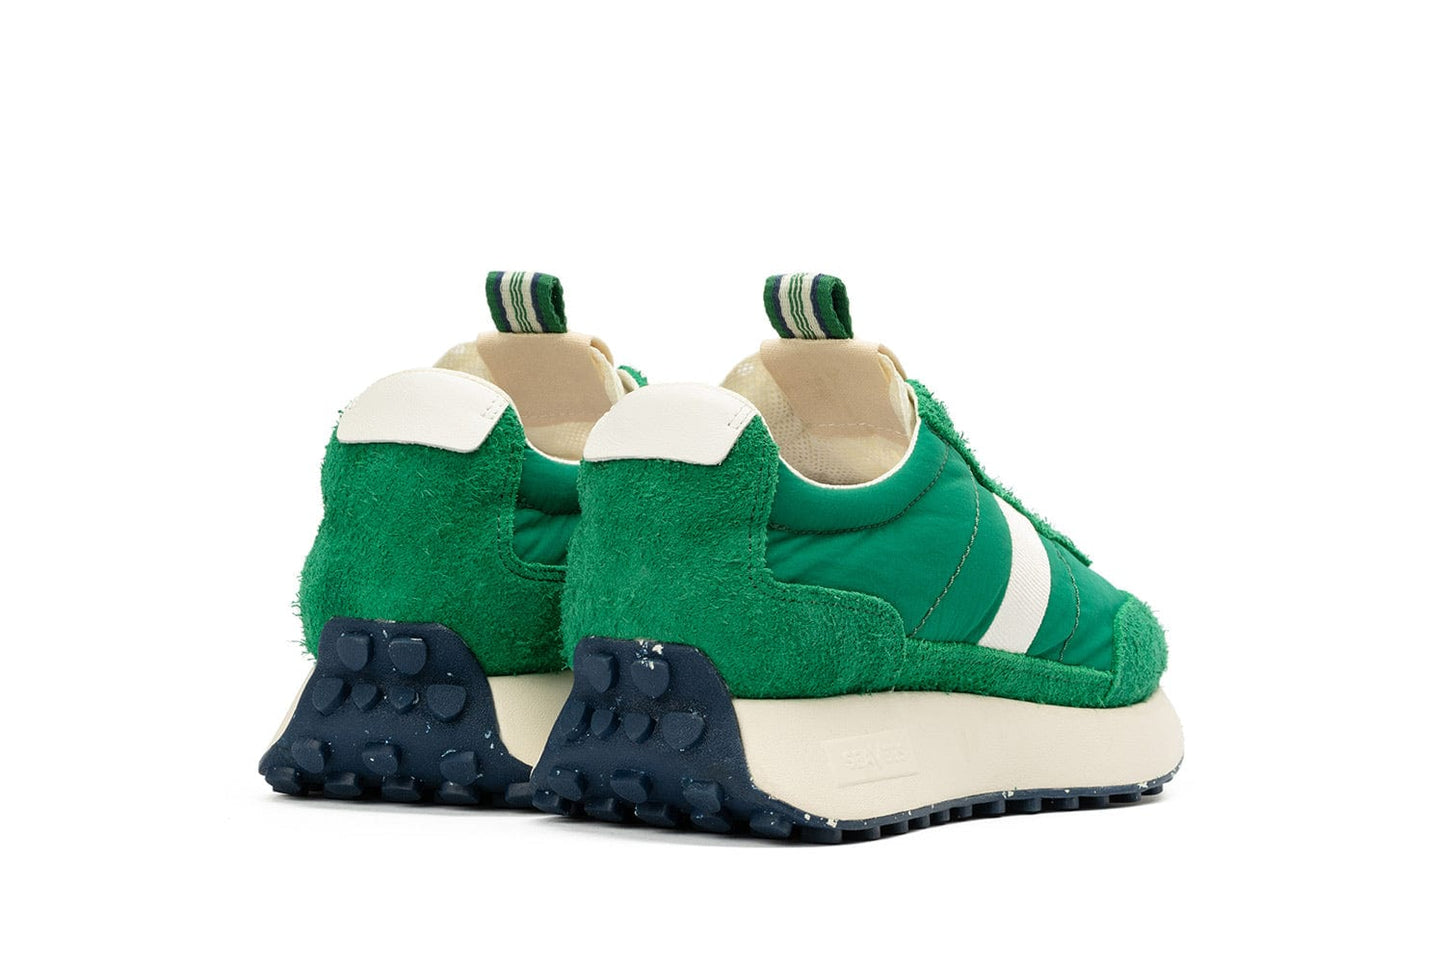 The SeaVees 'Acorn' sneakers in Grass Green from an angled rear view, showing the pull tab and sole detail.